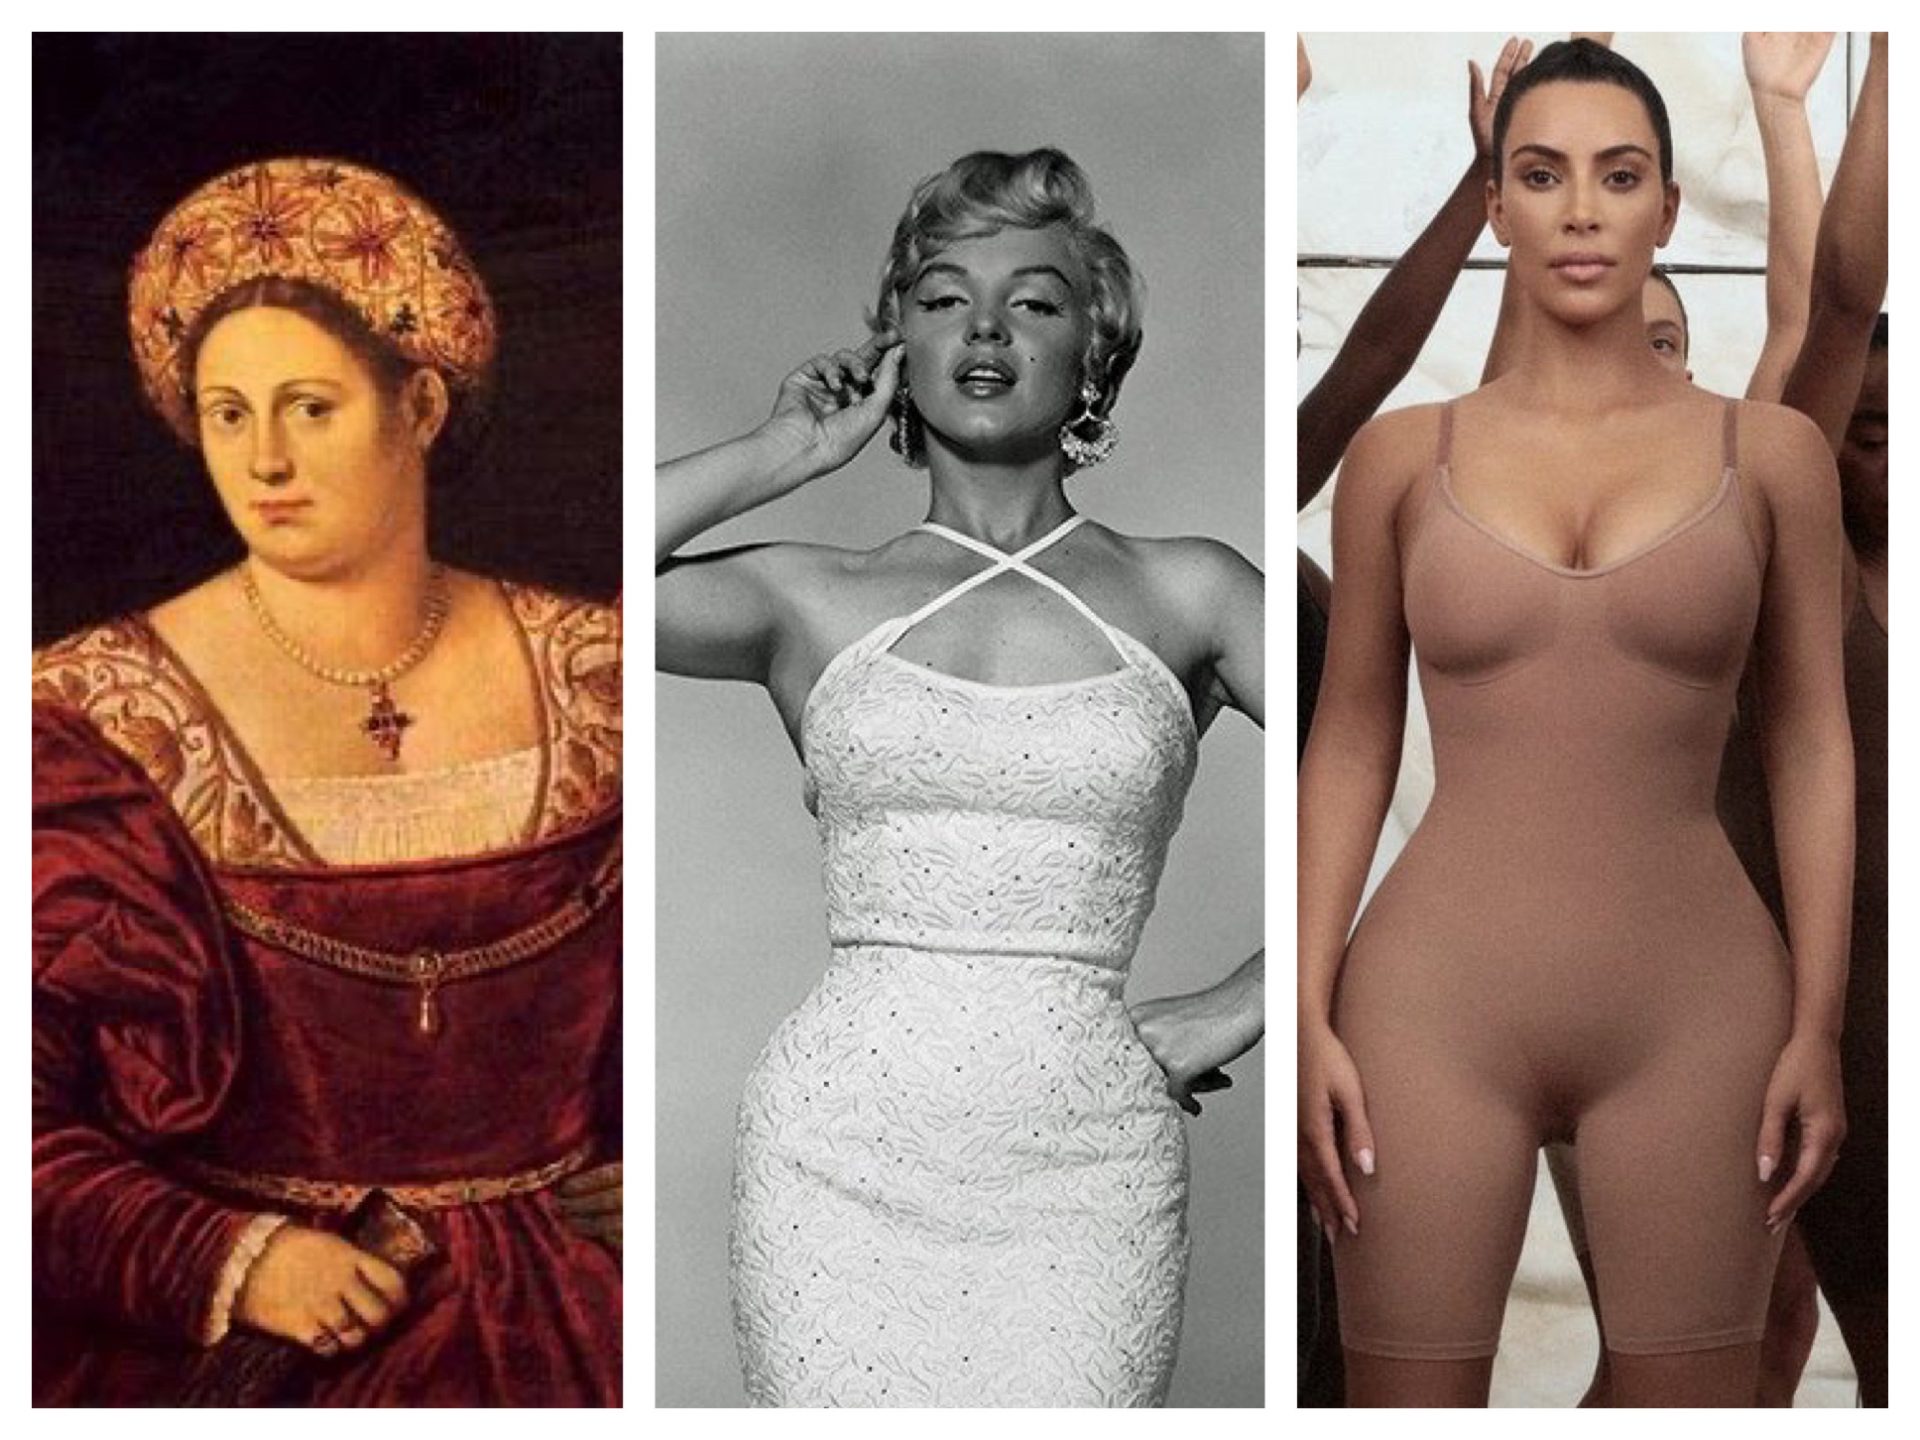 Ideal Body Types Have Changed Dramatically Throughout The Years